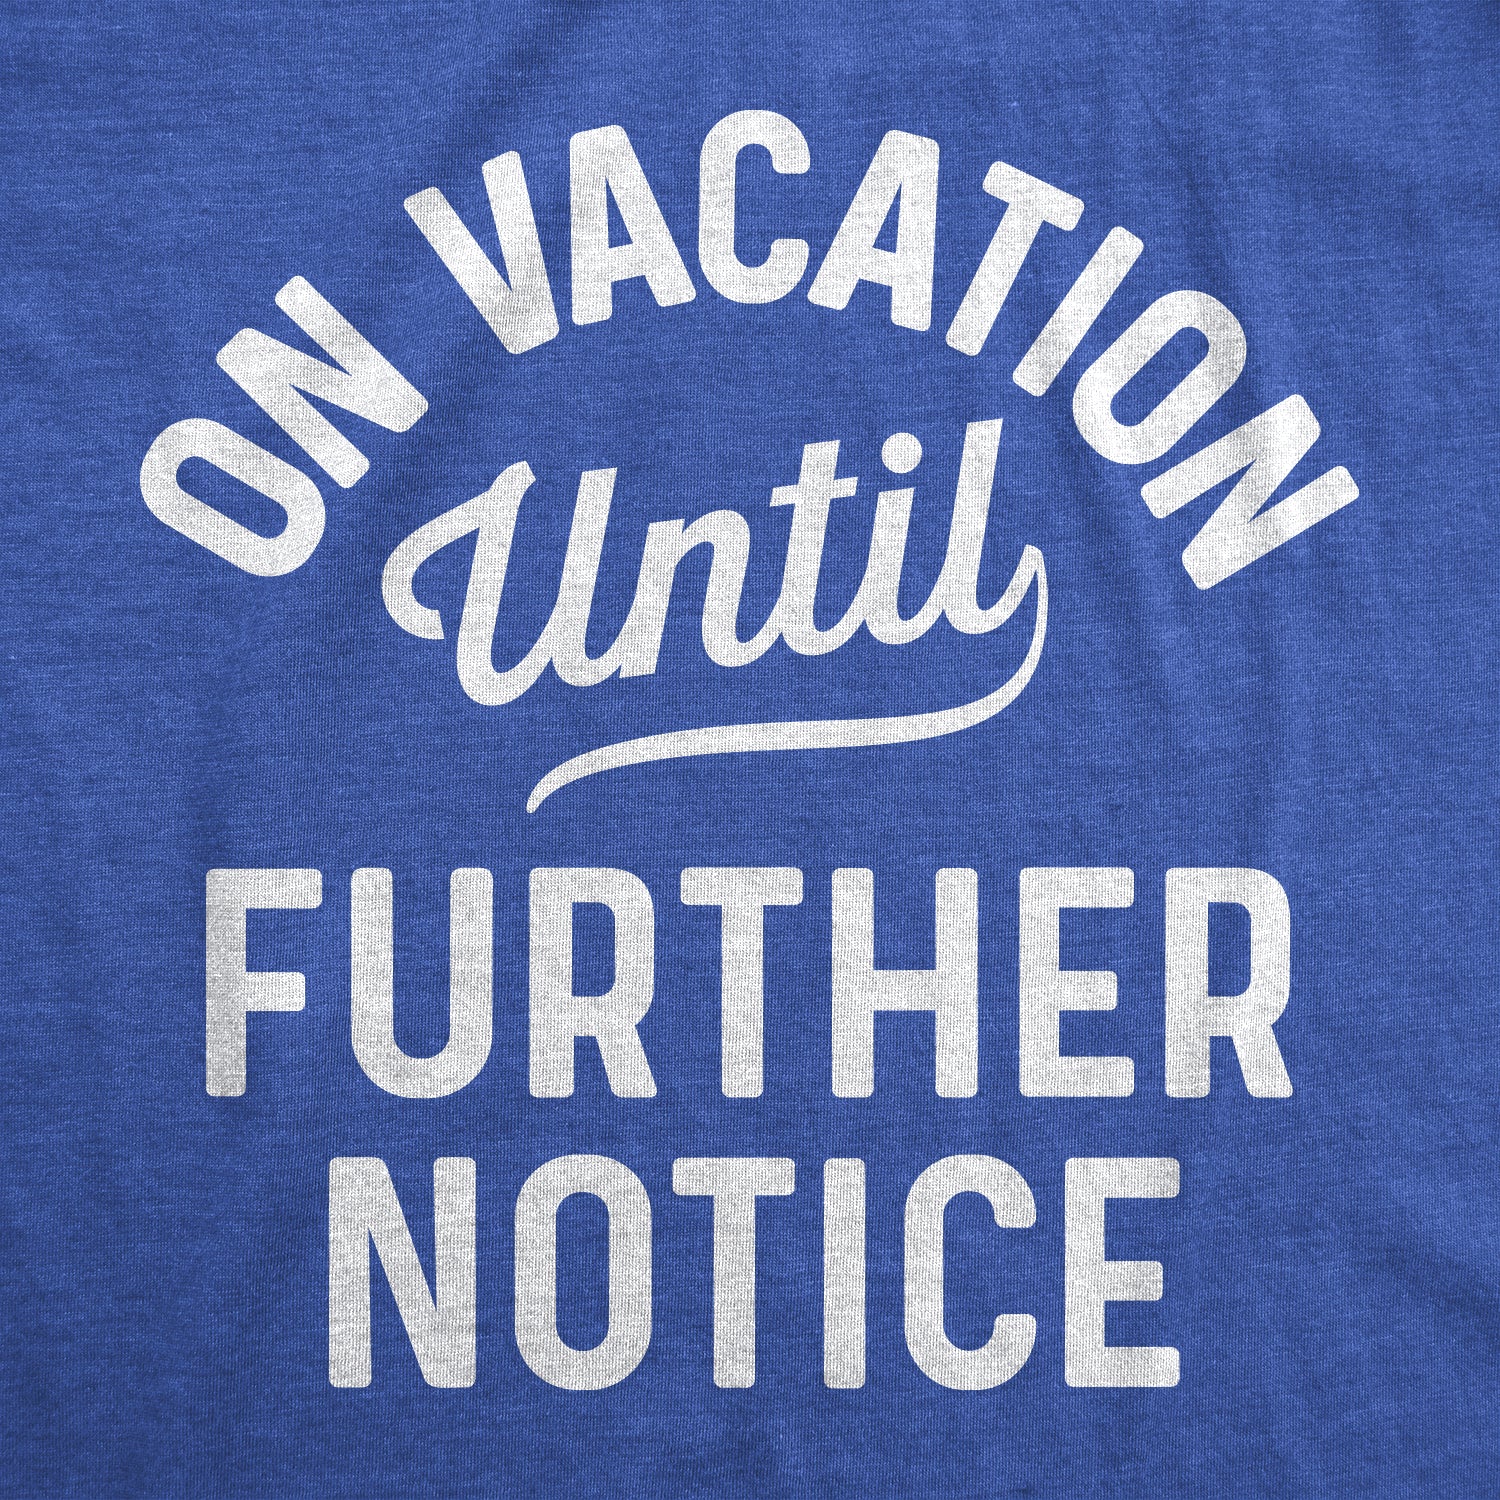 Funny Heather Royal - On Vacation On Vacation Until Further Notice Womens T Shirt Nerdy Vacation Tee